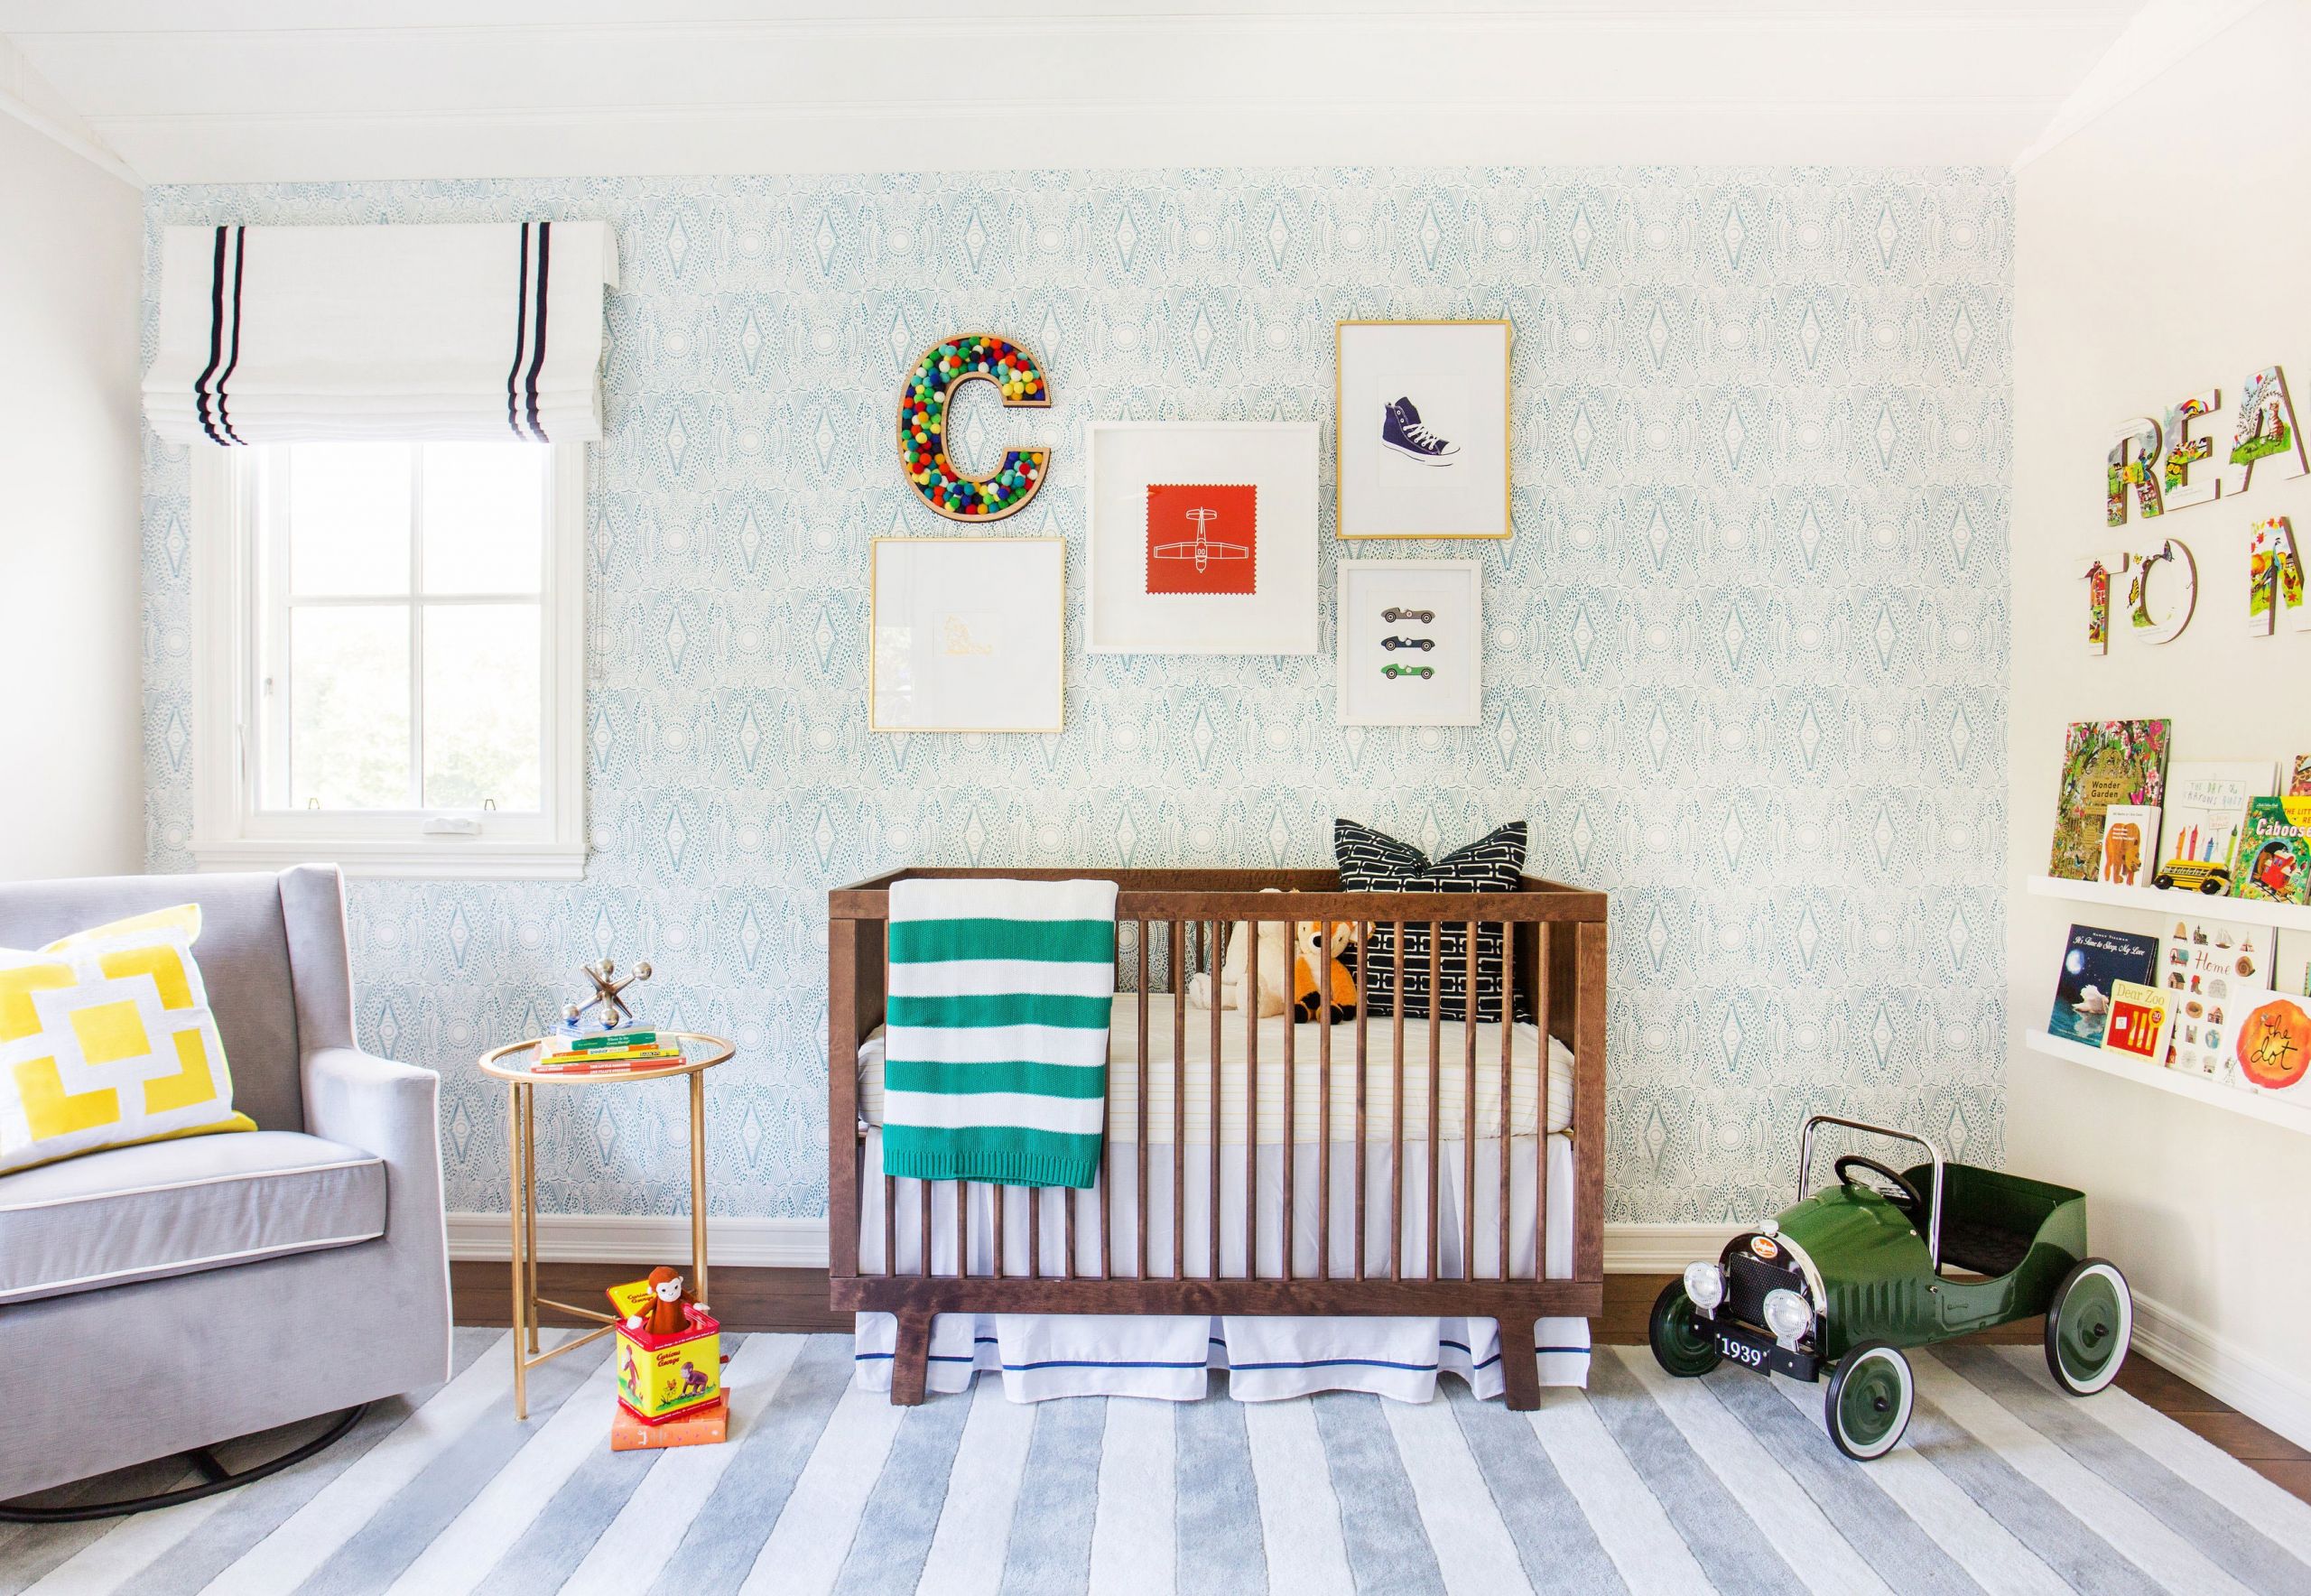 Kids Room Bedding
 3 Wall Decor Ideas Perfect for Kids’ Rooms s